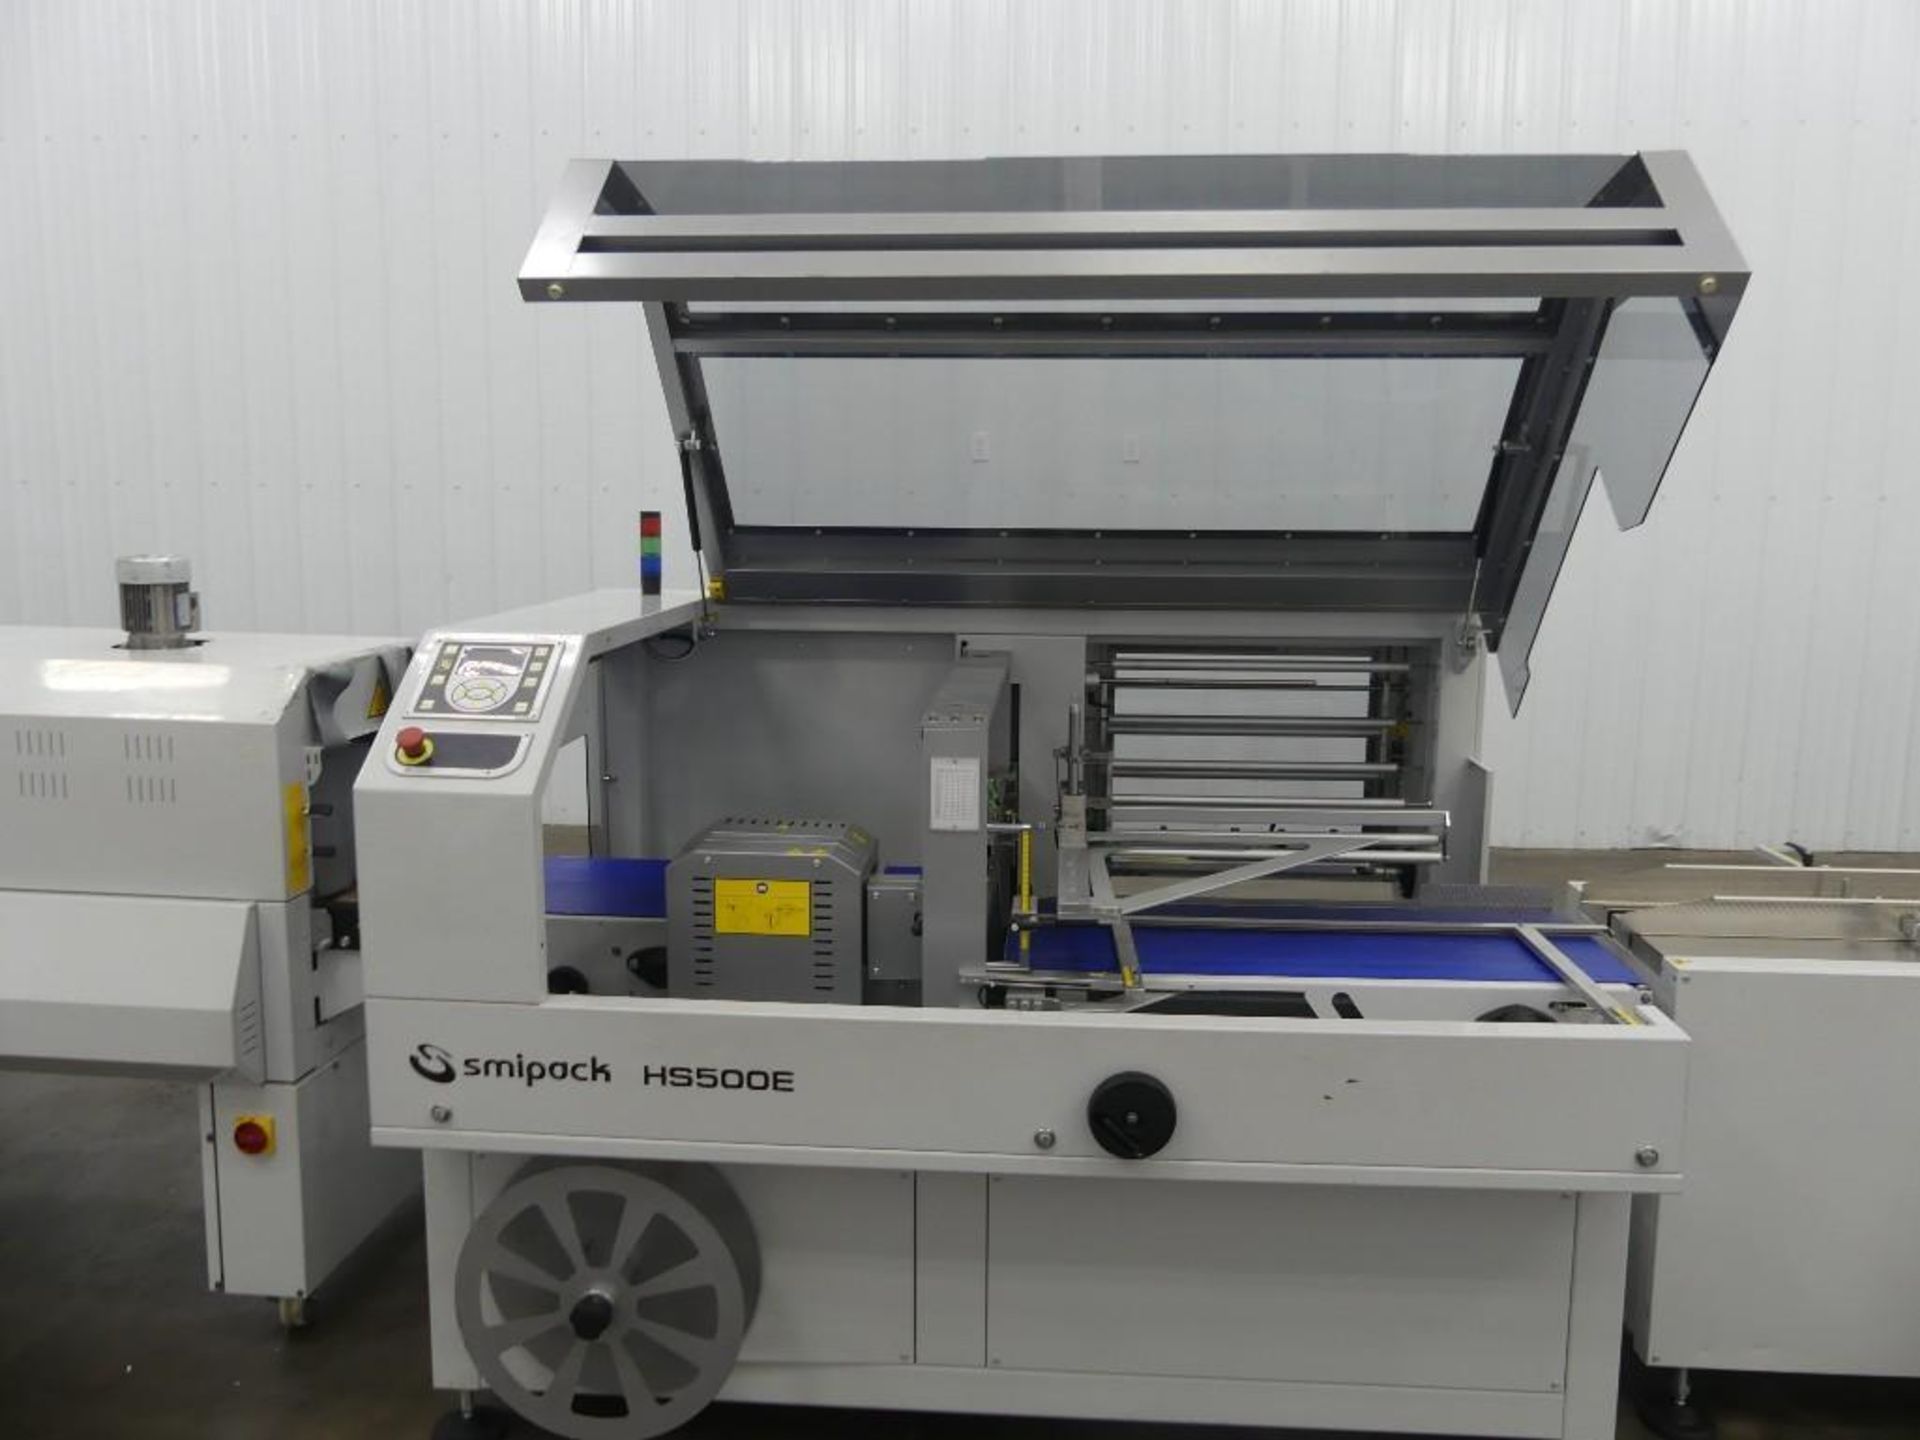 Smipack HS500E Semi-Automatic Side Sealer - Image 13 of 77